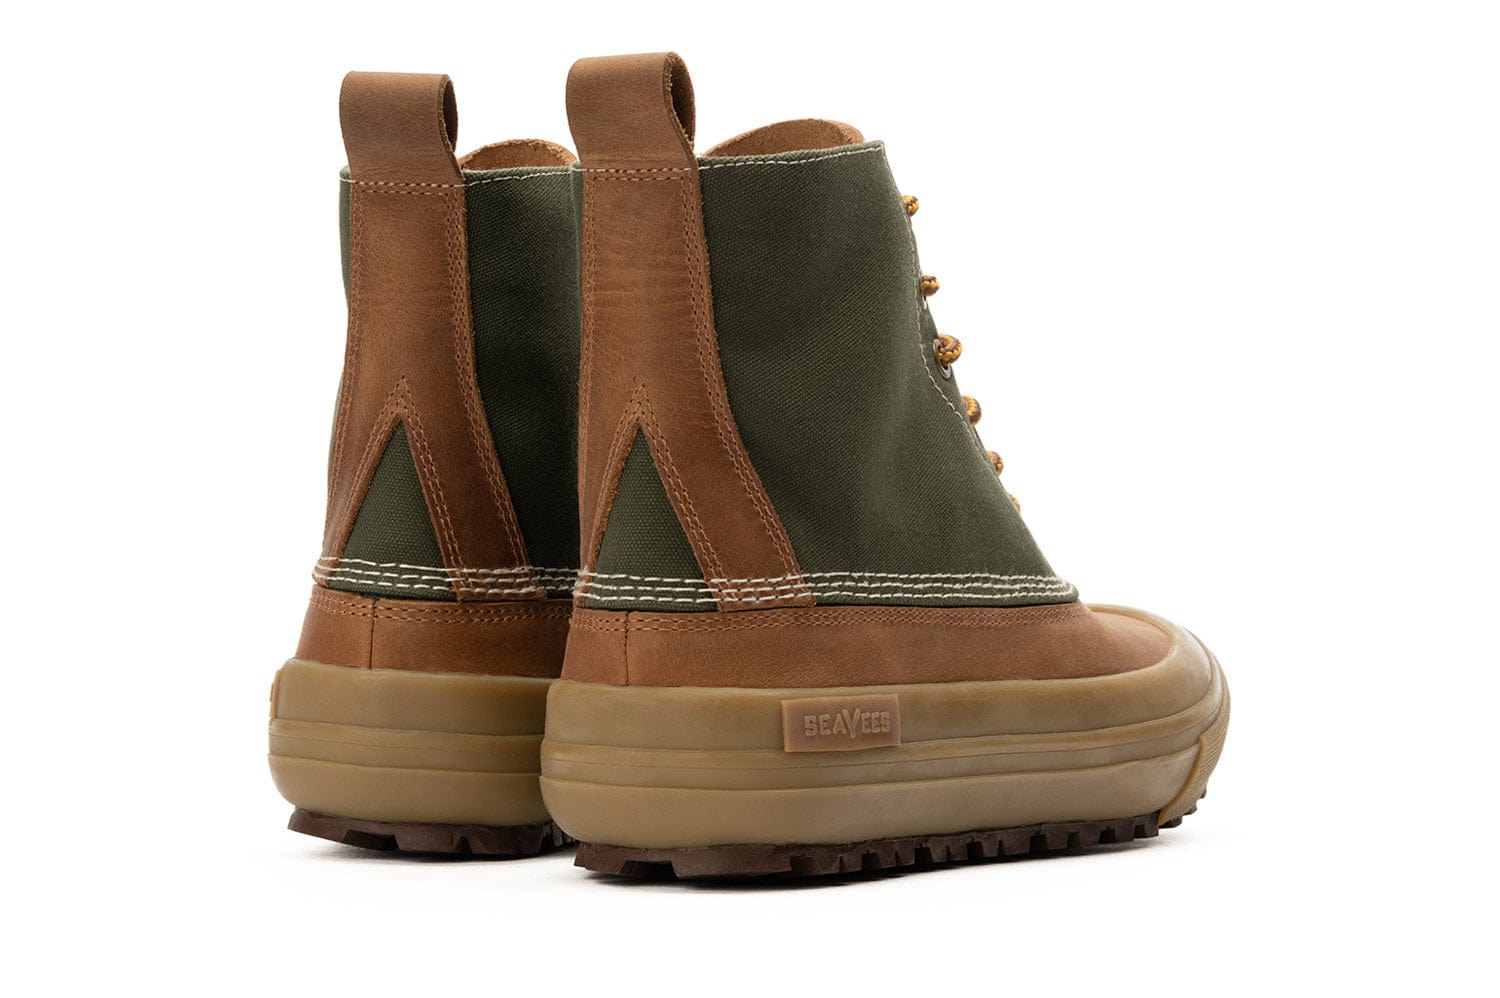 Rear view of Cascade Range boots in Cashew/Olive, showing off the unique back stitching and layered rubber sole.